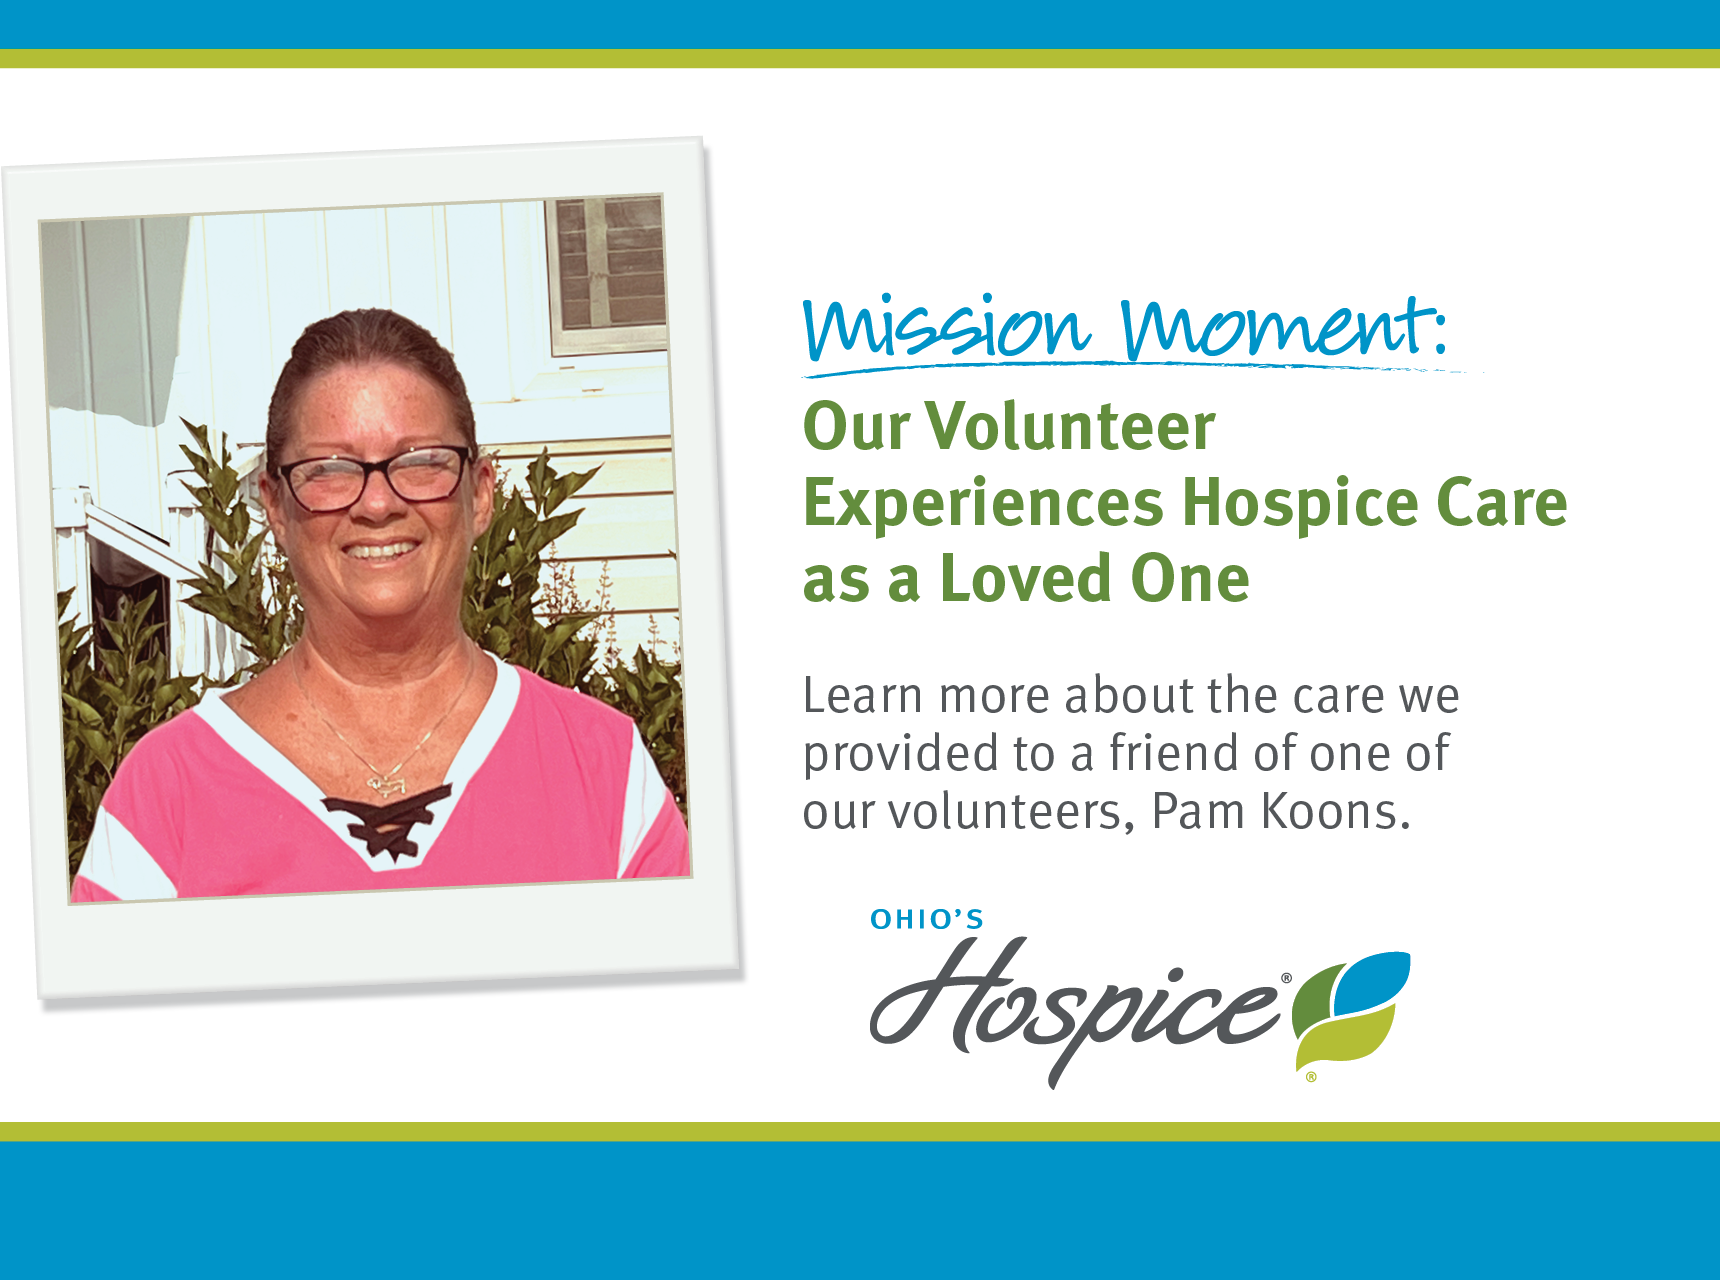 Mission Moment: Our Volunteer Experiences Hospice Care as Loved One